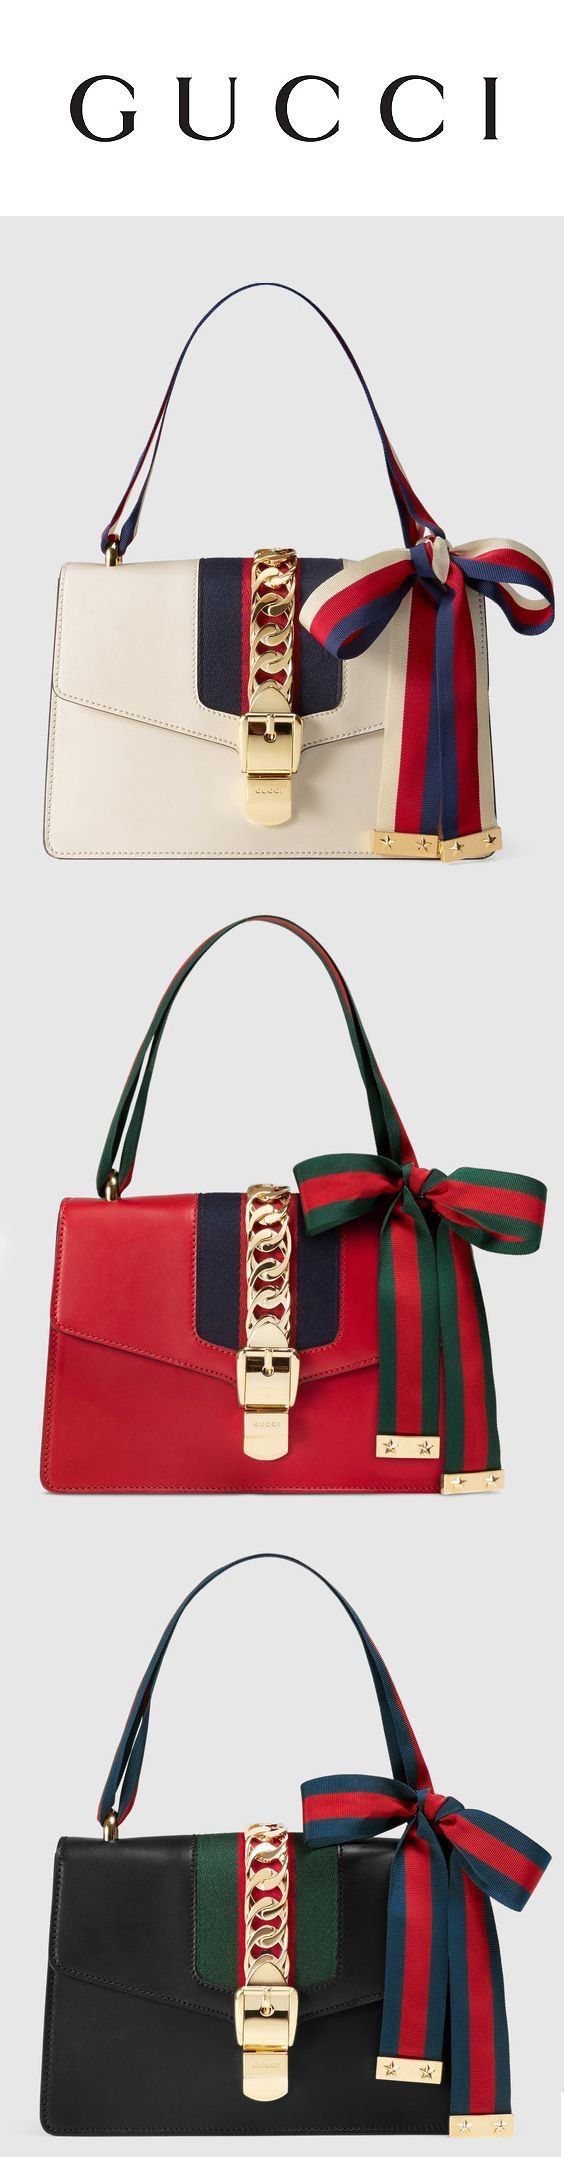 Gucci Handbags Collection & More details